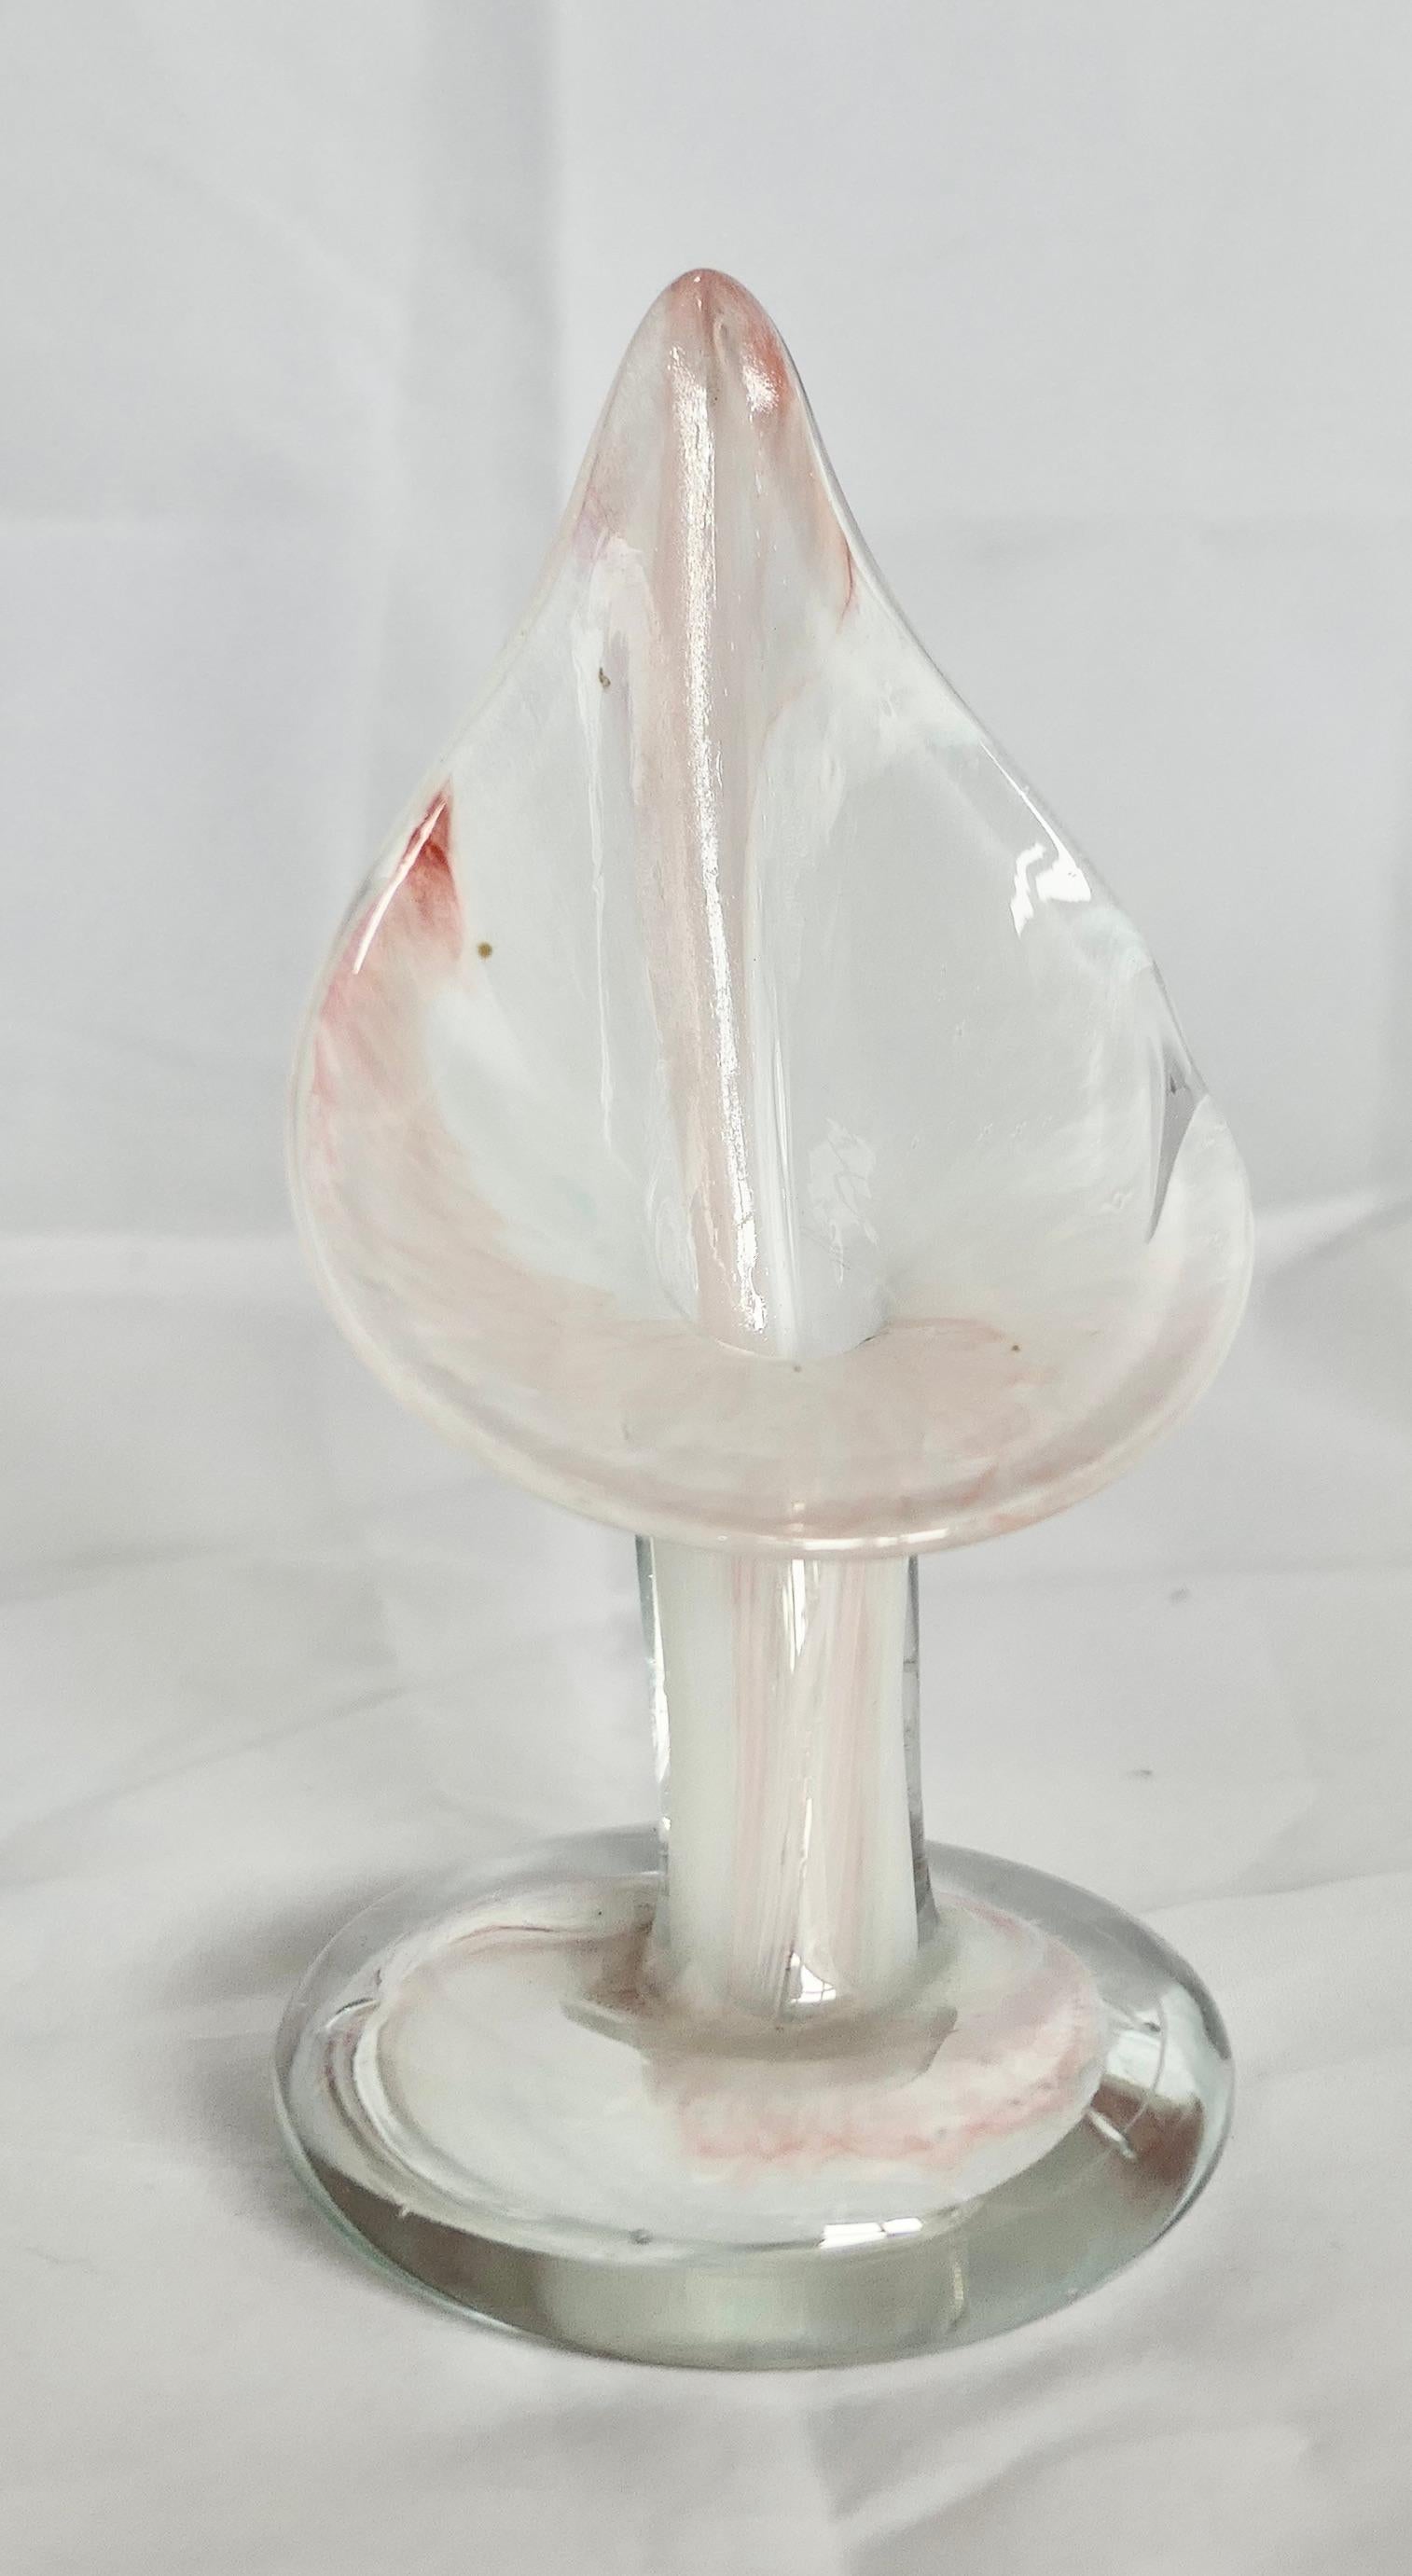 Hand Blown Victorian Semi Opalescent Jack in the Pulpit Vase

A delightful example of a Jack in the Pulpit Vase, this one is semi opalescent with a trail of pink running through it
No Chips or Cracks
The Vase is 7” tall and 3.5” in Diameter
FB150